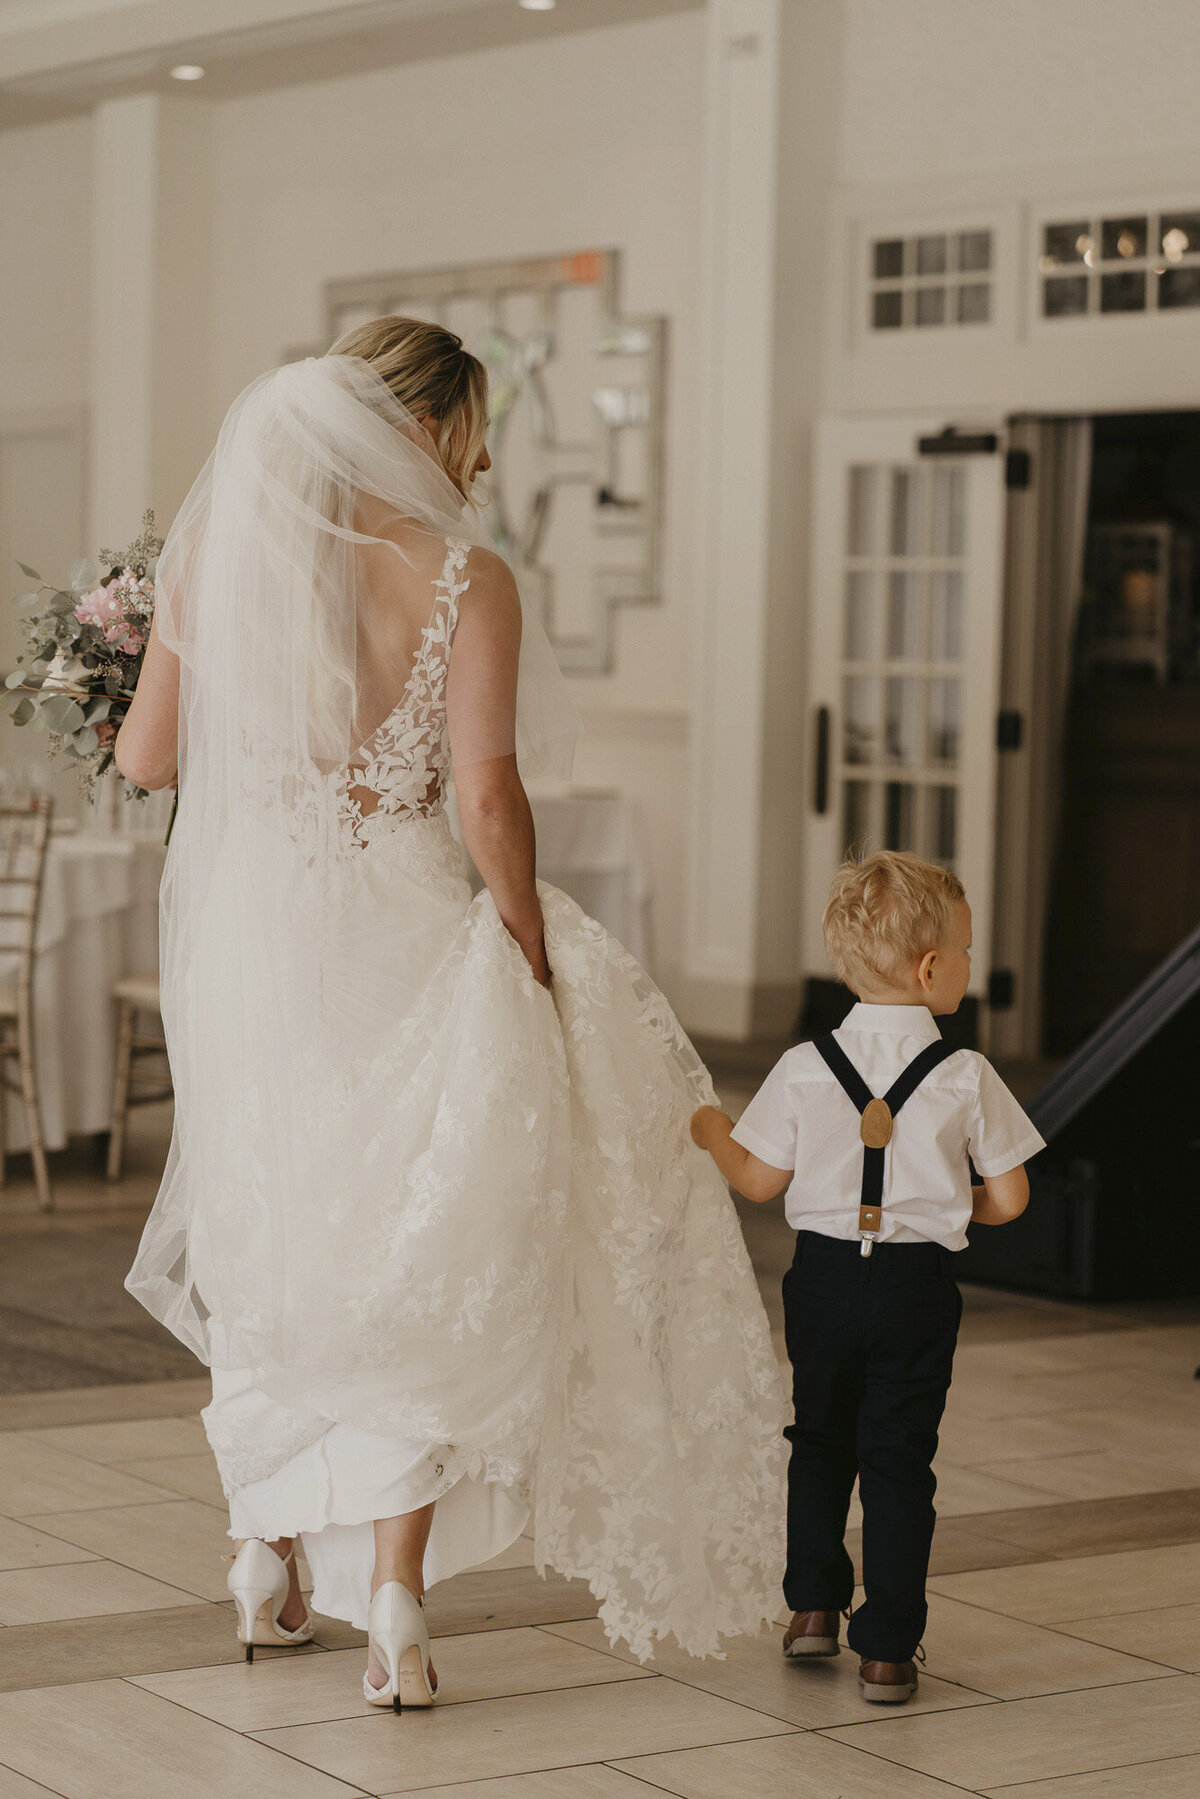 Bride walking with a ring bearer